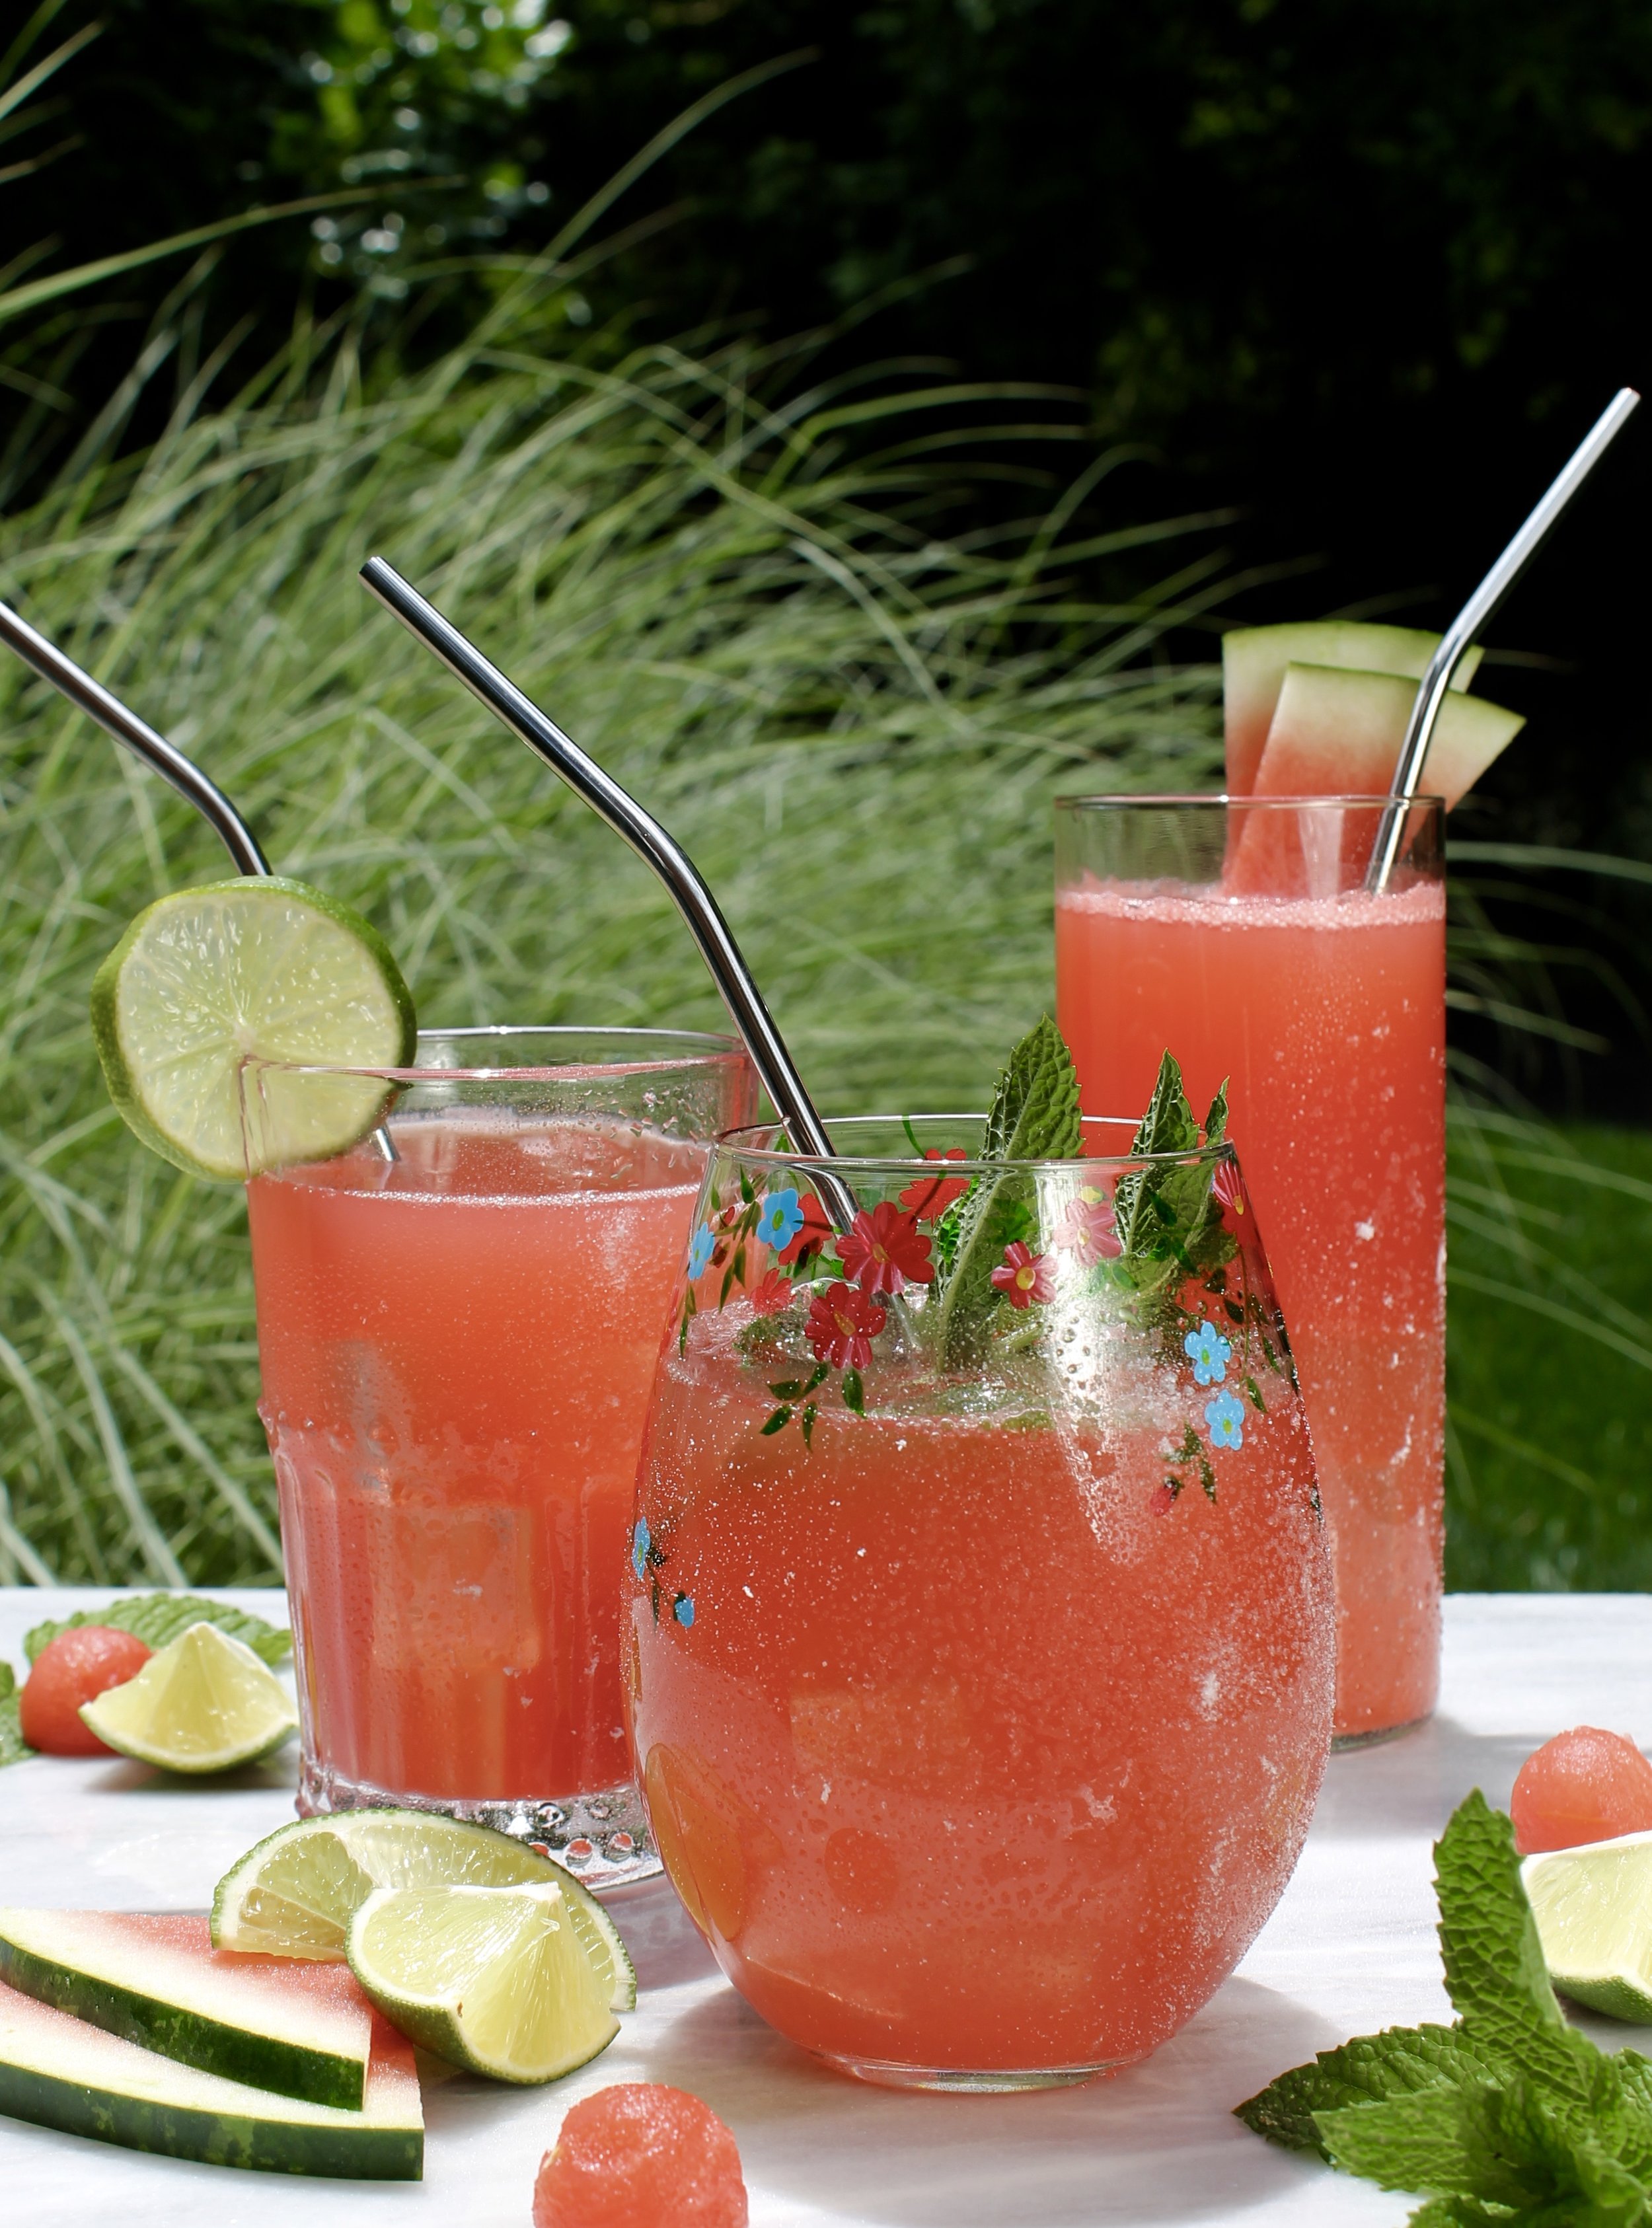 3 glasses filled with a reddish colored cocktail, garnished with mint, lime and watermelon in an outdoor setting.